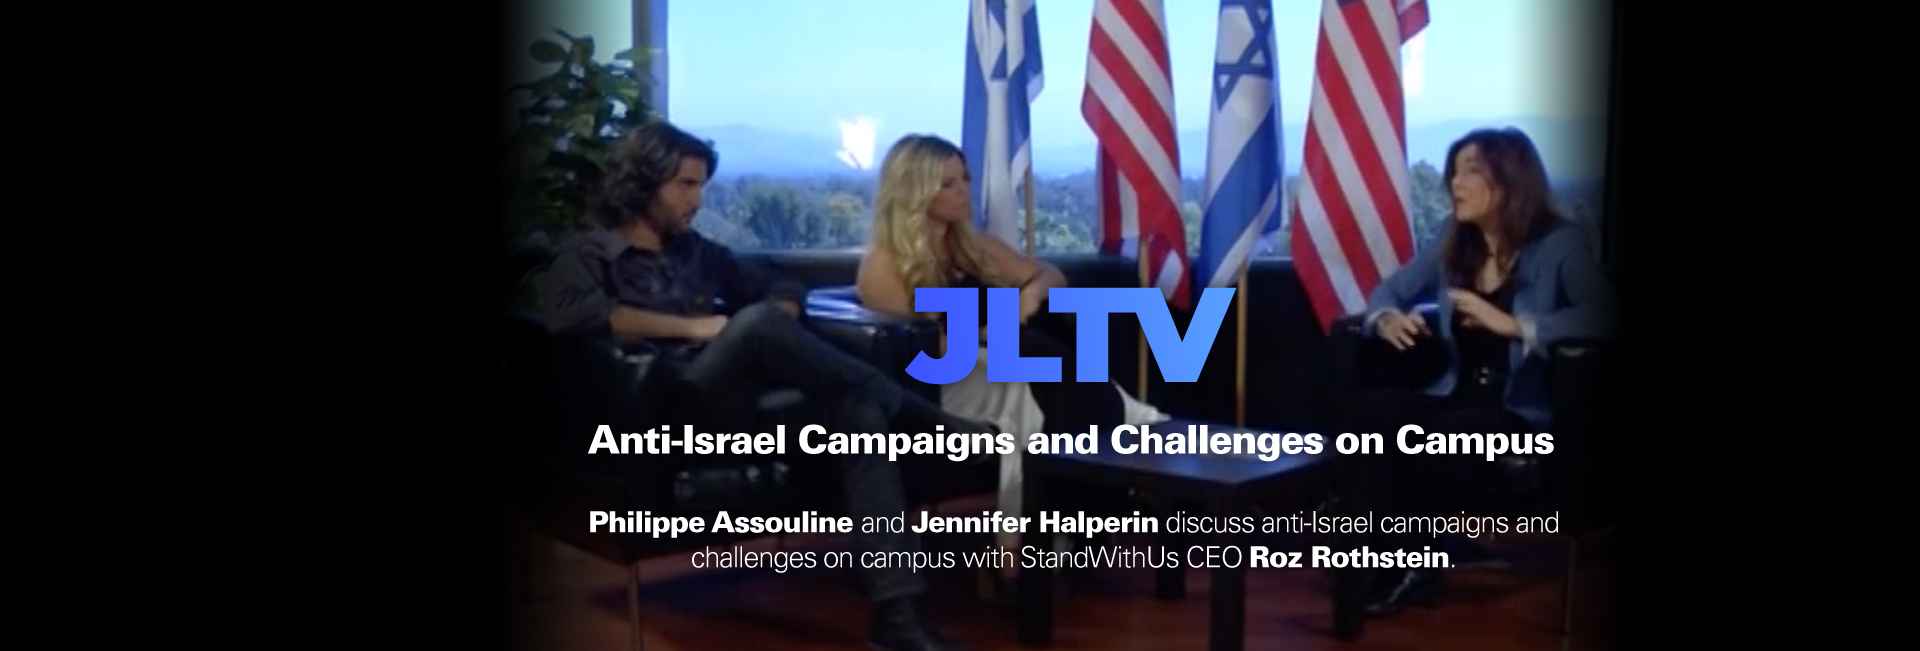 StandWithUs on JLTV – Anti-Israel Campaigns and Challenges on Campus